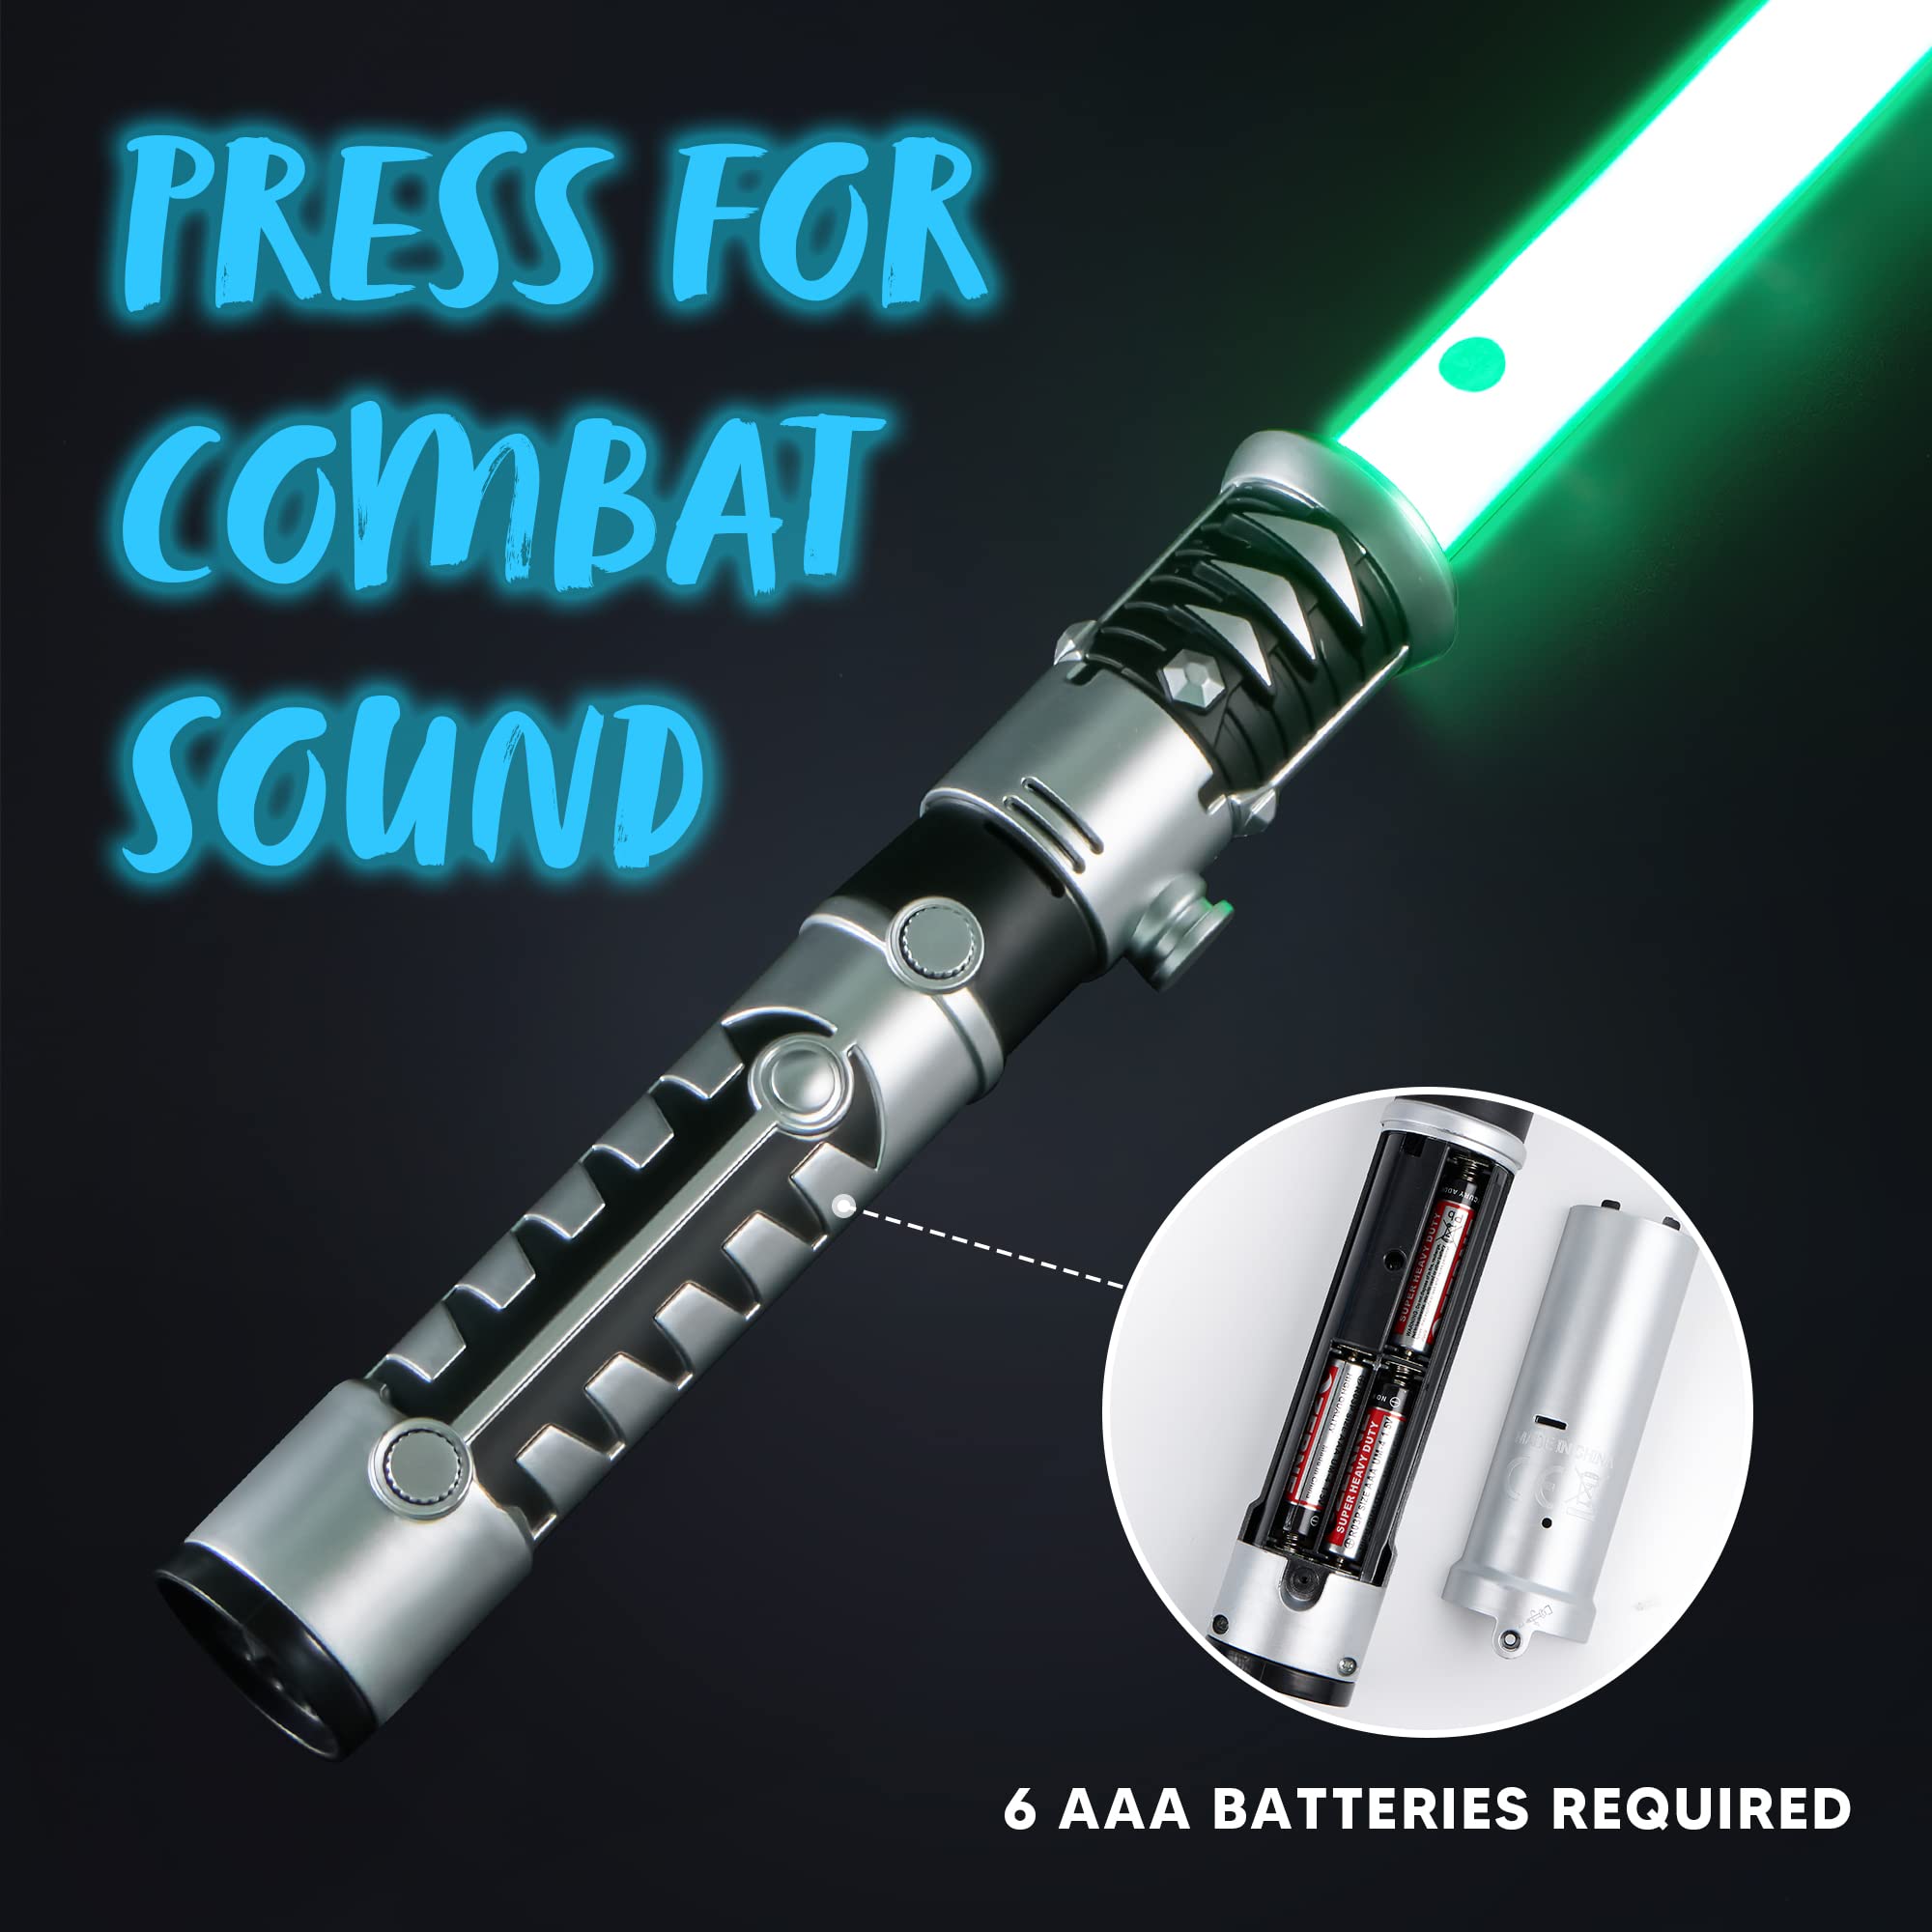 JOYIN 2-in-1 Light Up Saber, Sword for Kids, LED Dual Laser Swords Set with FX Sound (Motion Sensitive) and Realistic Sliver Handle for Fighters and Warriors, New Years Eve Party Supplies Boys Stuff